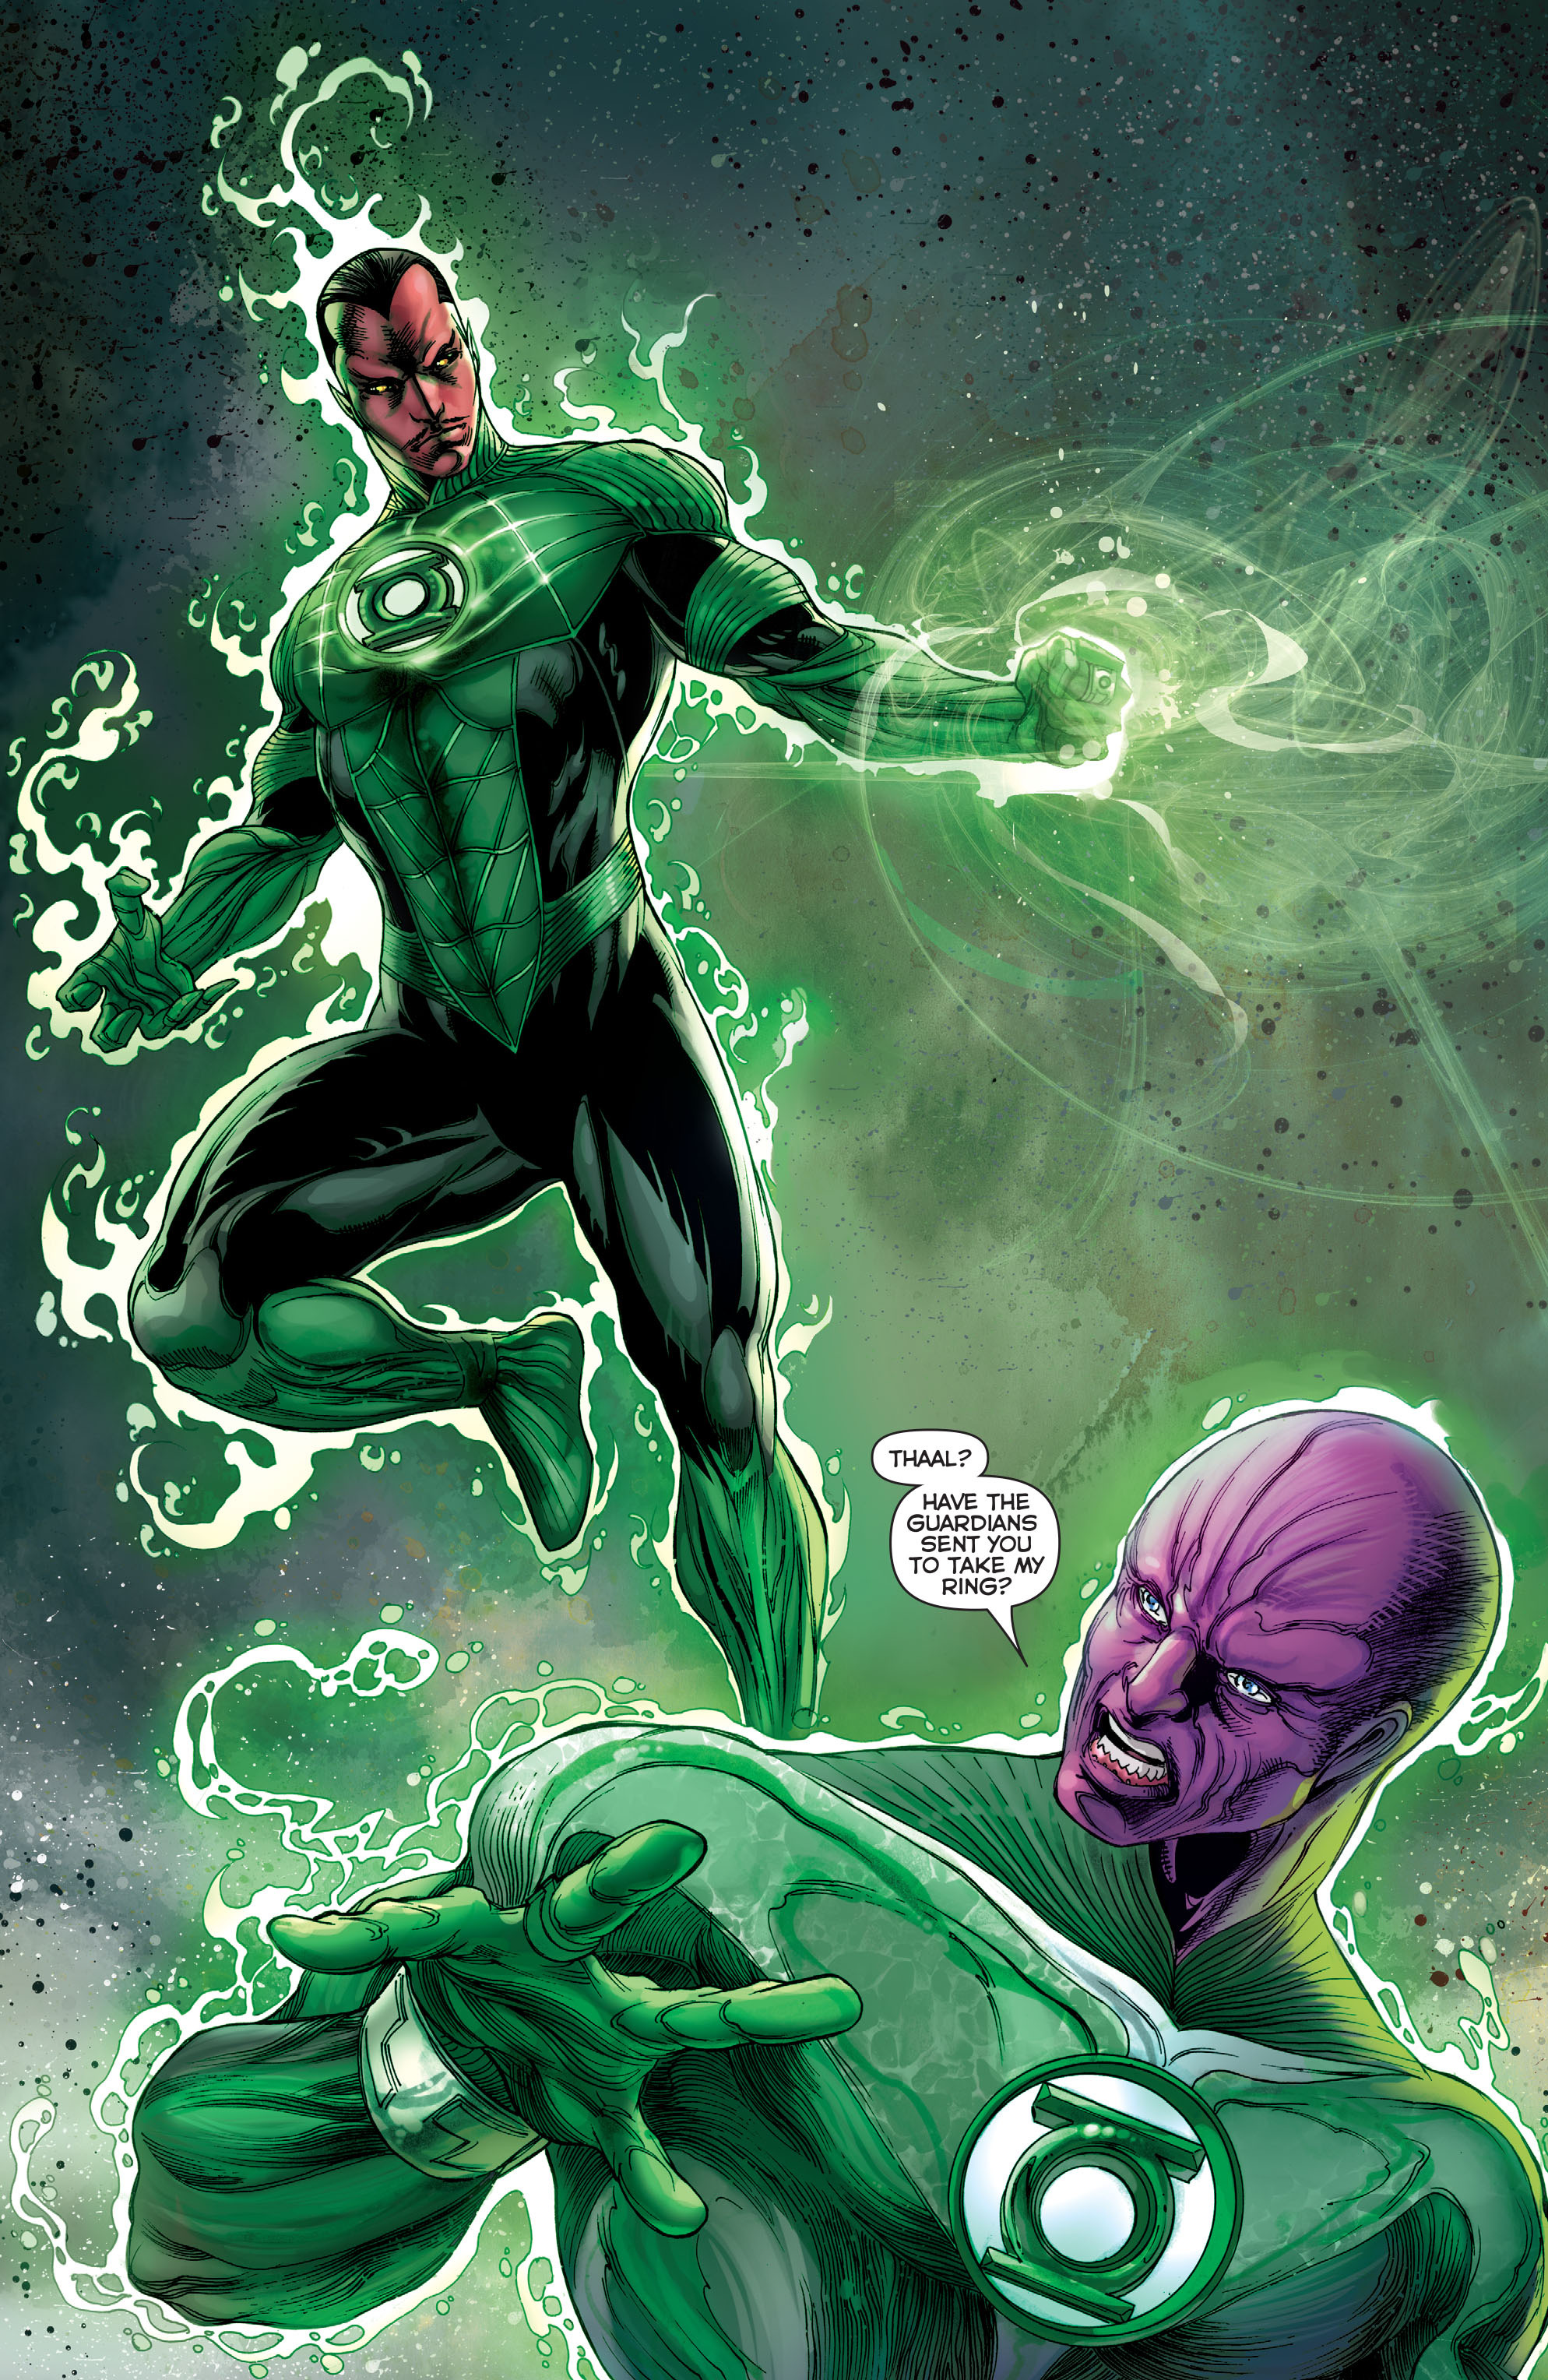 Flashpoint: The World of Flashpoint Featuring Green Lantern Full #1 - English 38